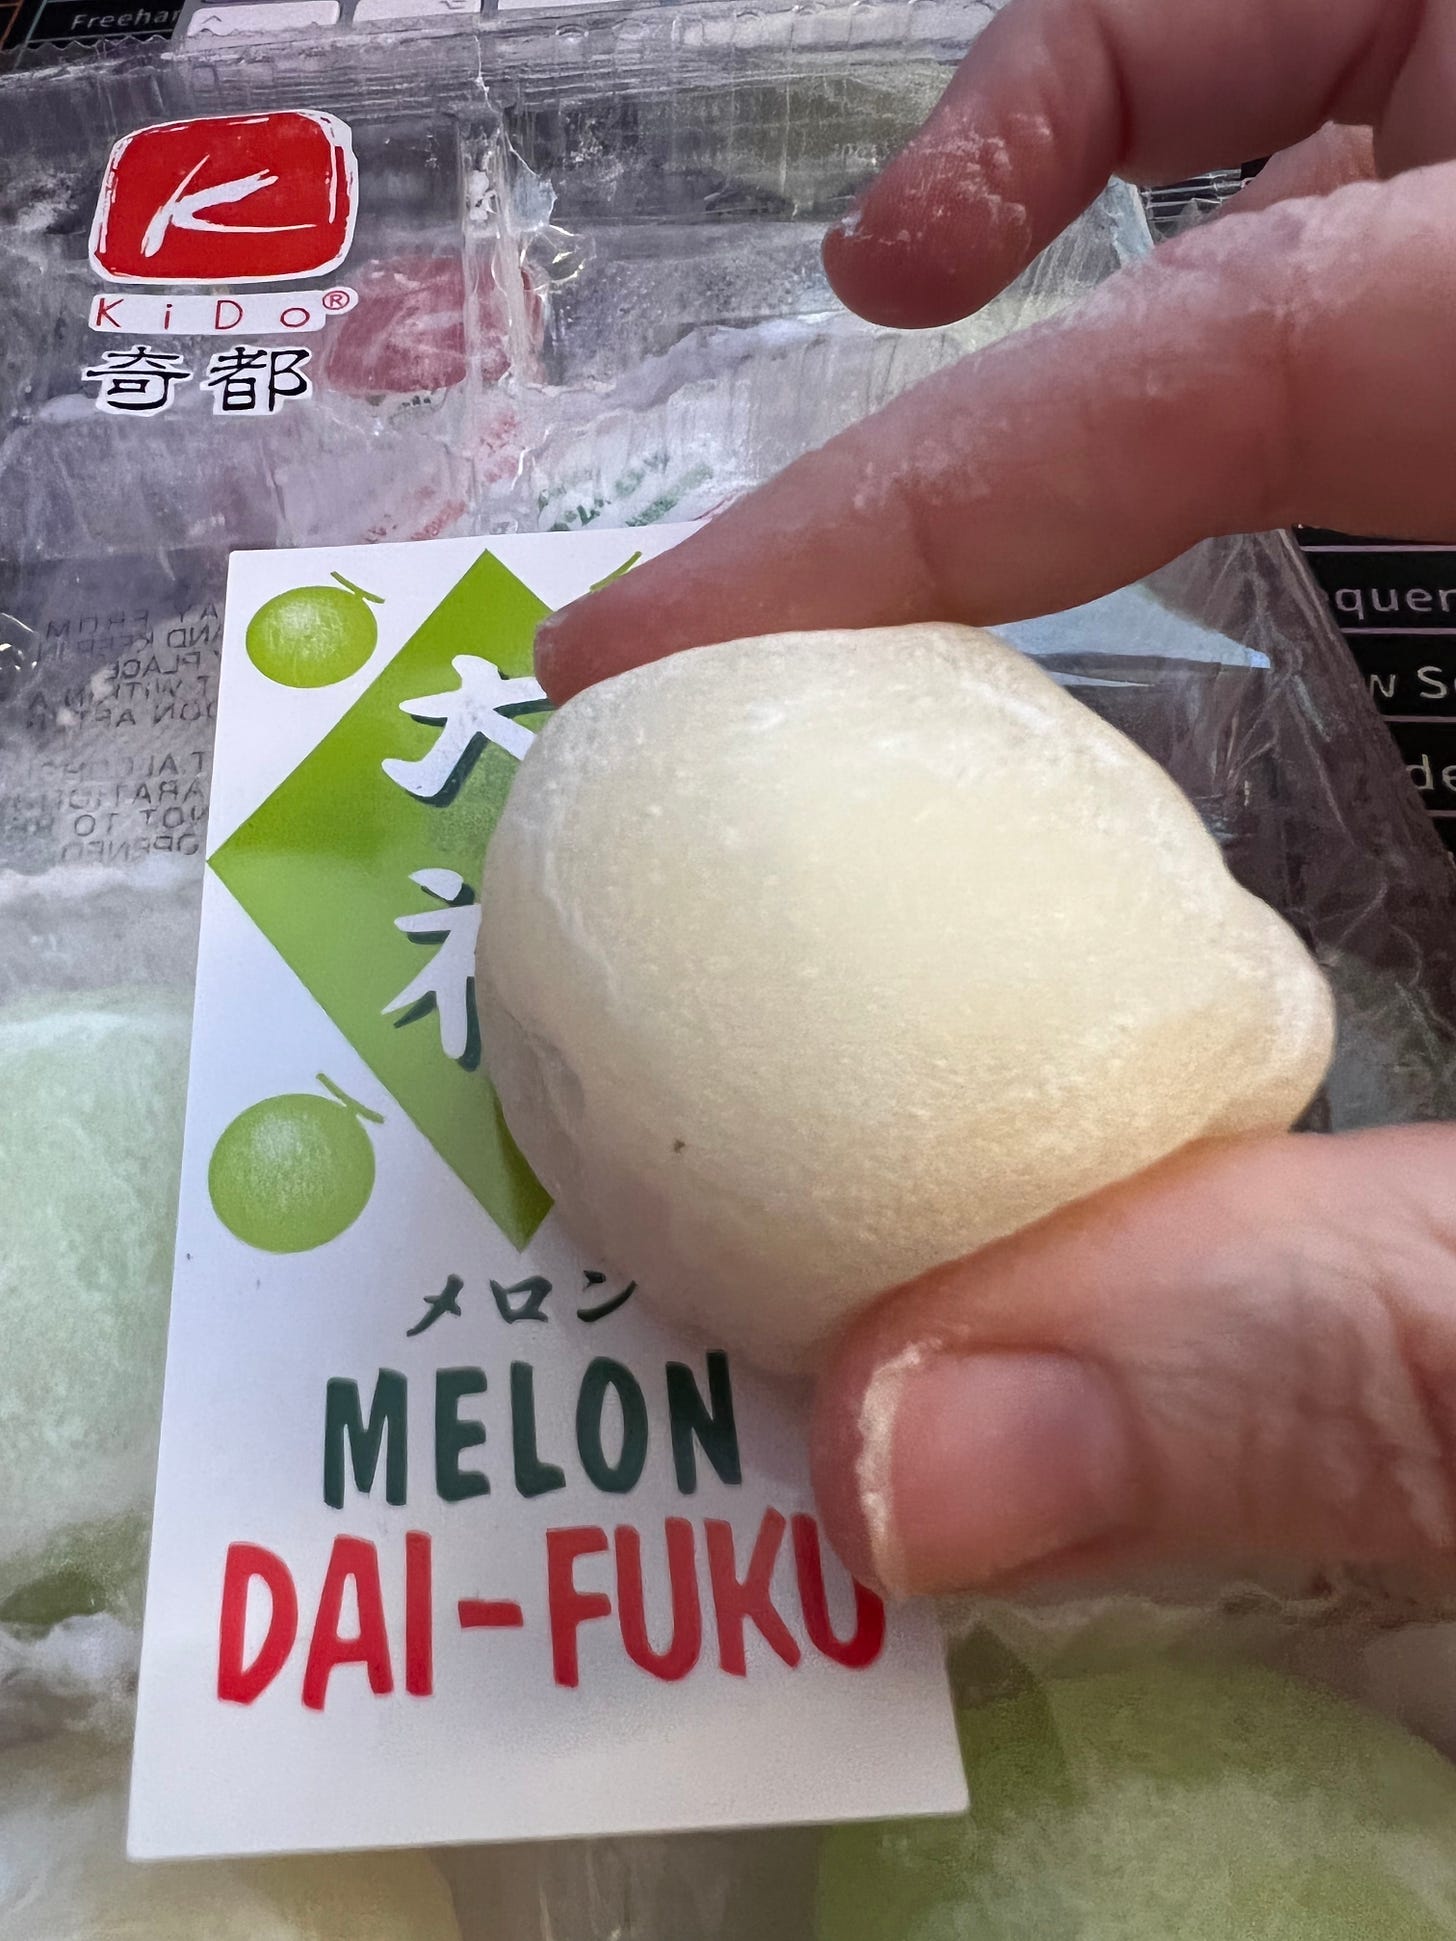 My fingers holding a small mochi ball, hovering over a plastic packet of melon and plain balls.Mochi is a Japanese rice cake made of mochigome, a short-grain japonica glutinous rice, and sometimes other ingredients such as water, sugar, and cornstarch. The rice is pounded into paste and molded into the desired shape. In Japan it is traditionally made in a ceremony called mochitsuki.